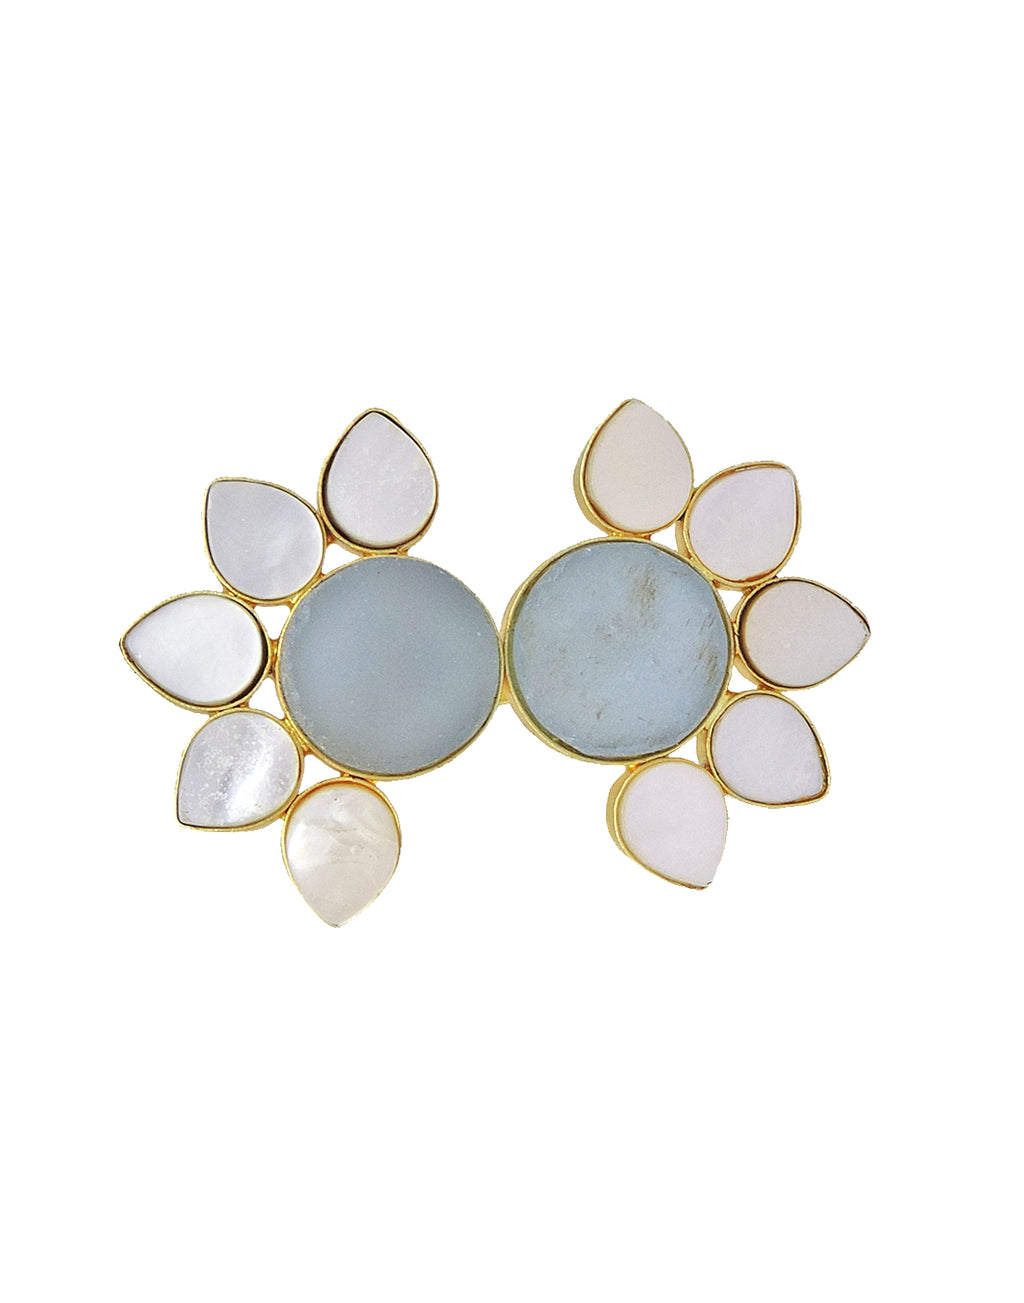 Twin Flora Ring (Blue Onyx) - Statement Rings - Gold-Plated & Hypoallergenic Jewellery - Made in India - Dubai Jewellery - Dori